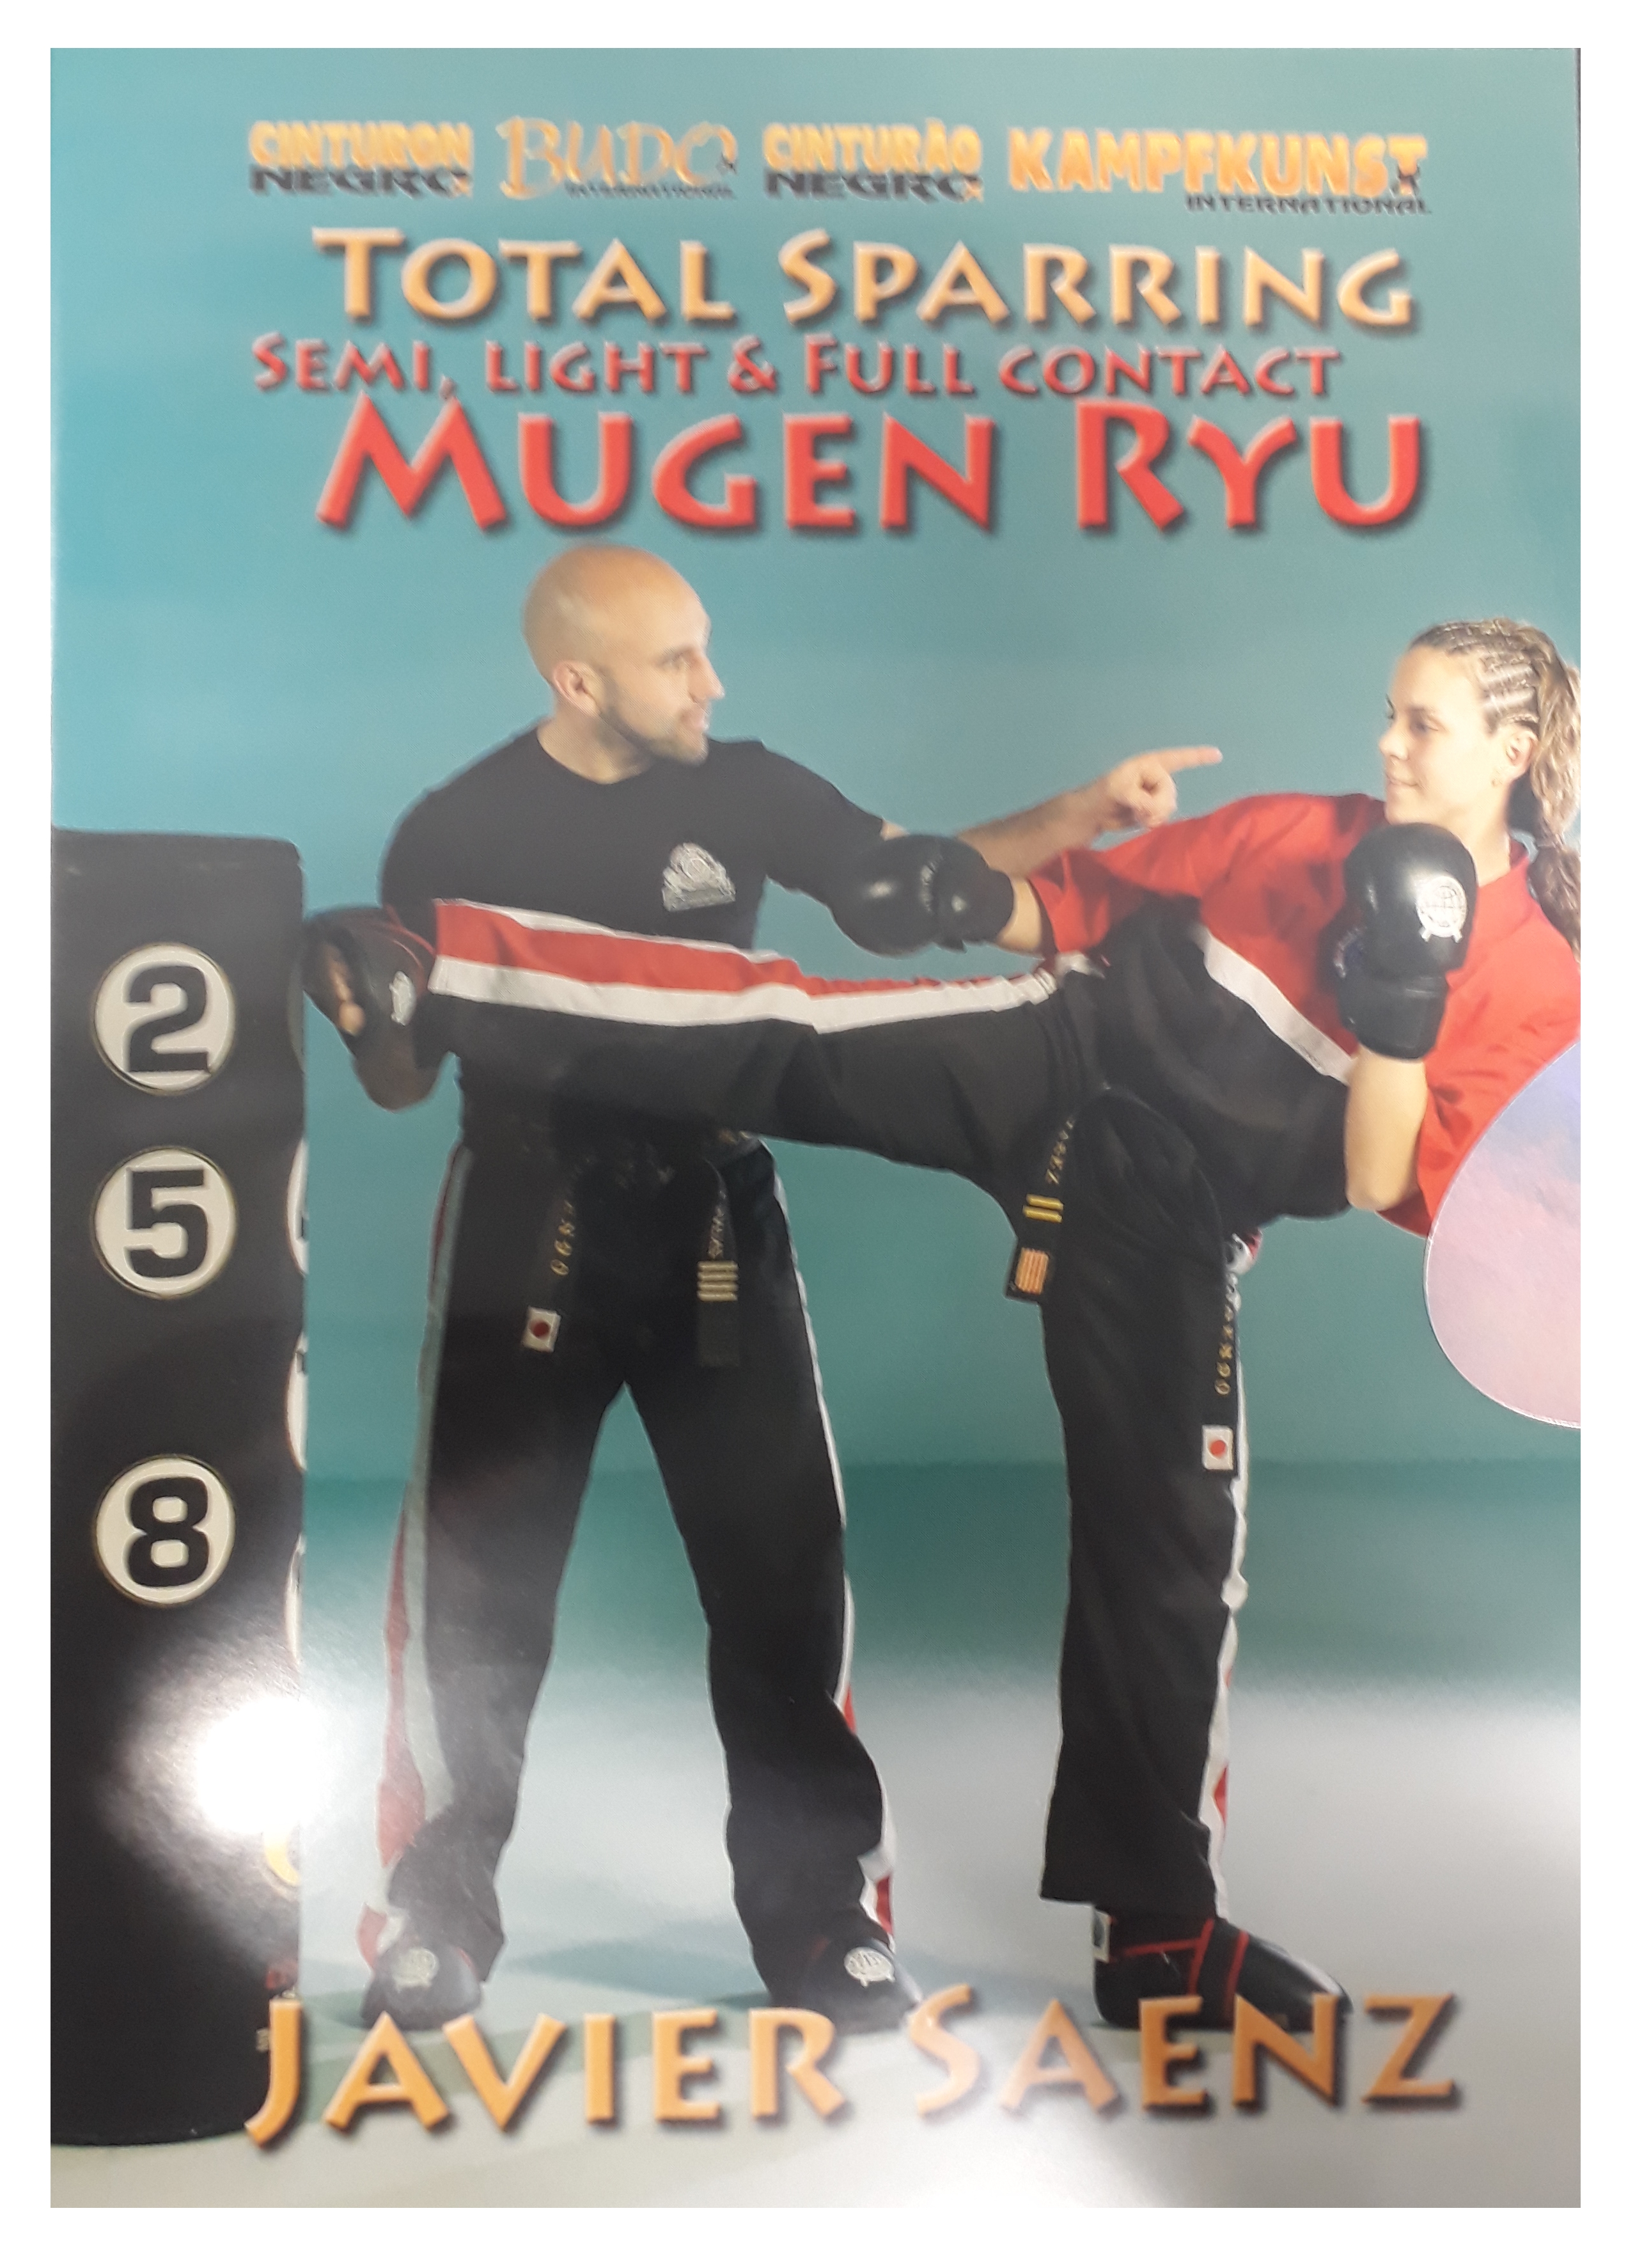 DVD Mugen Ryu Total Sparring - Semi, Light & Full Contact